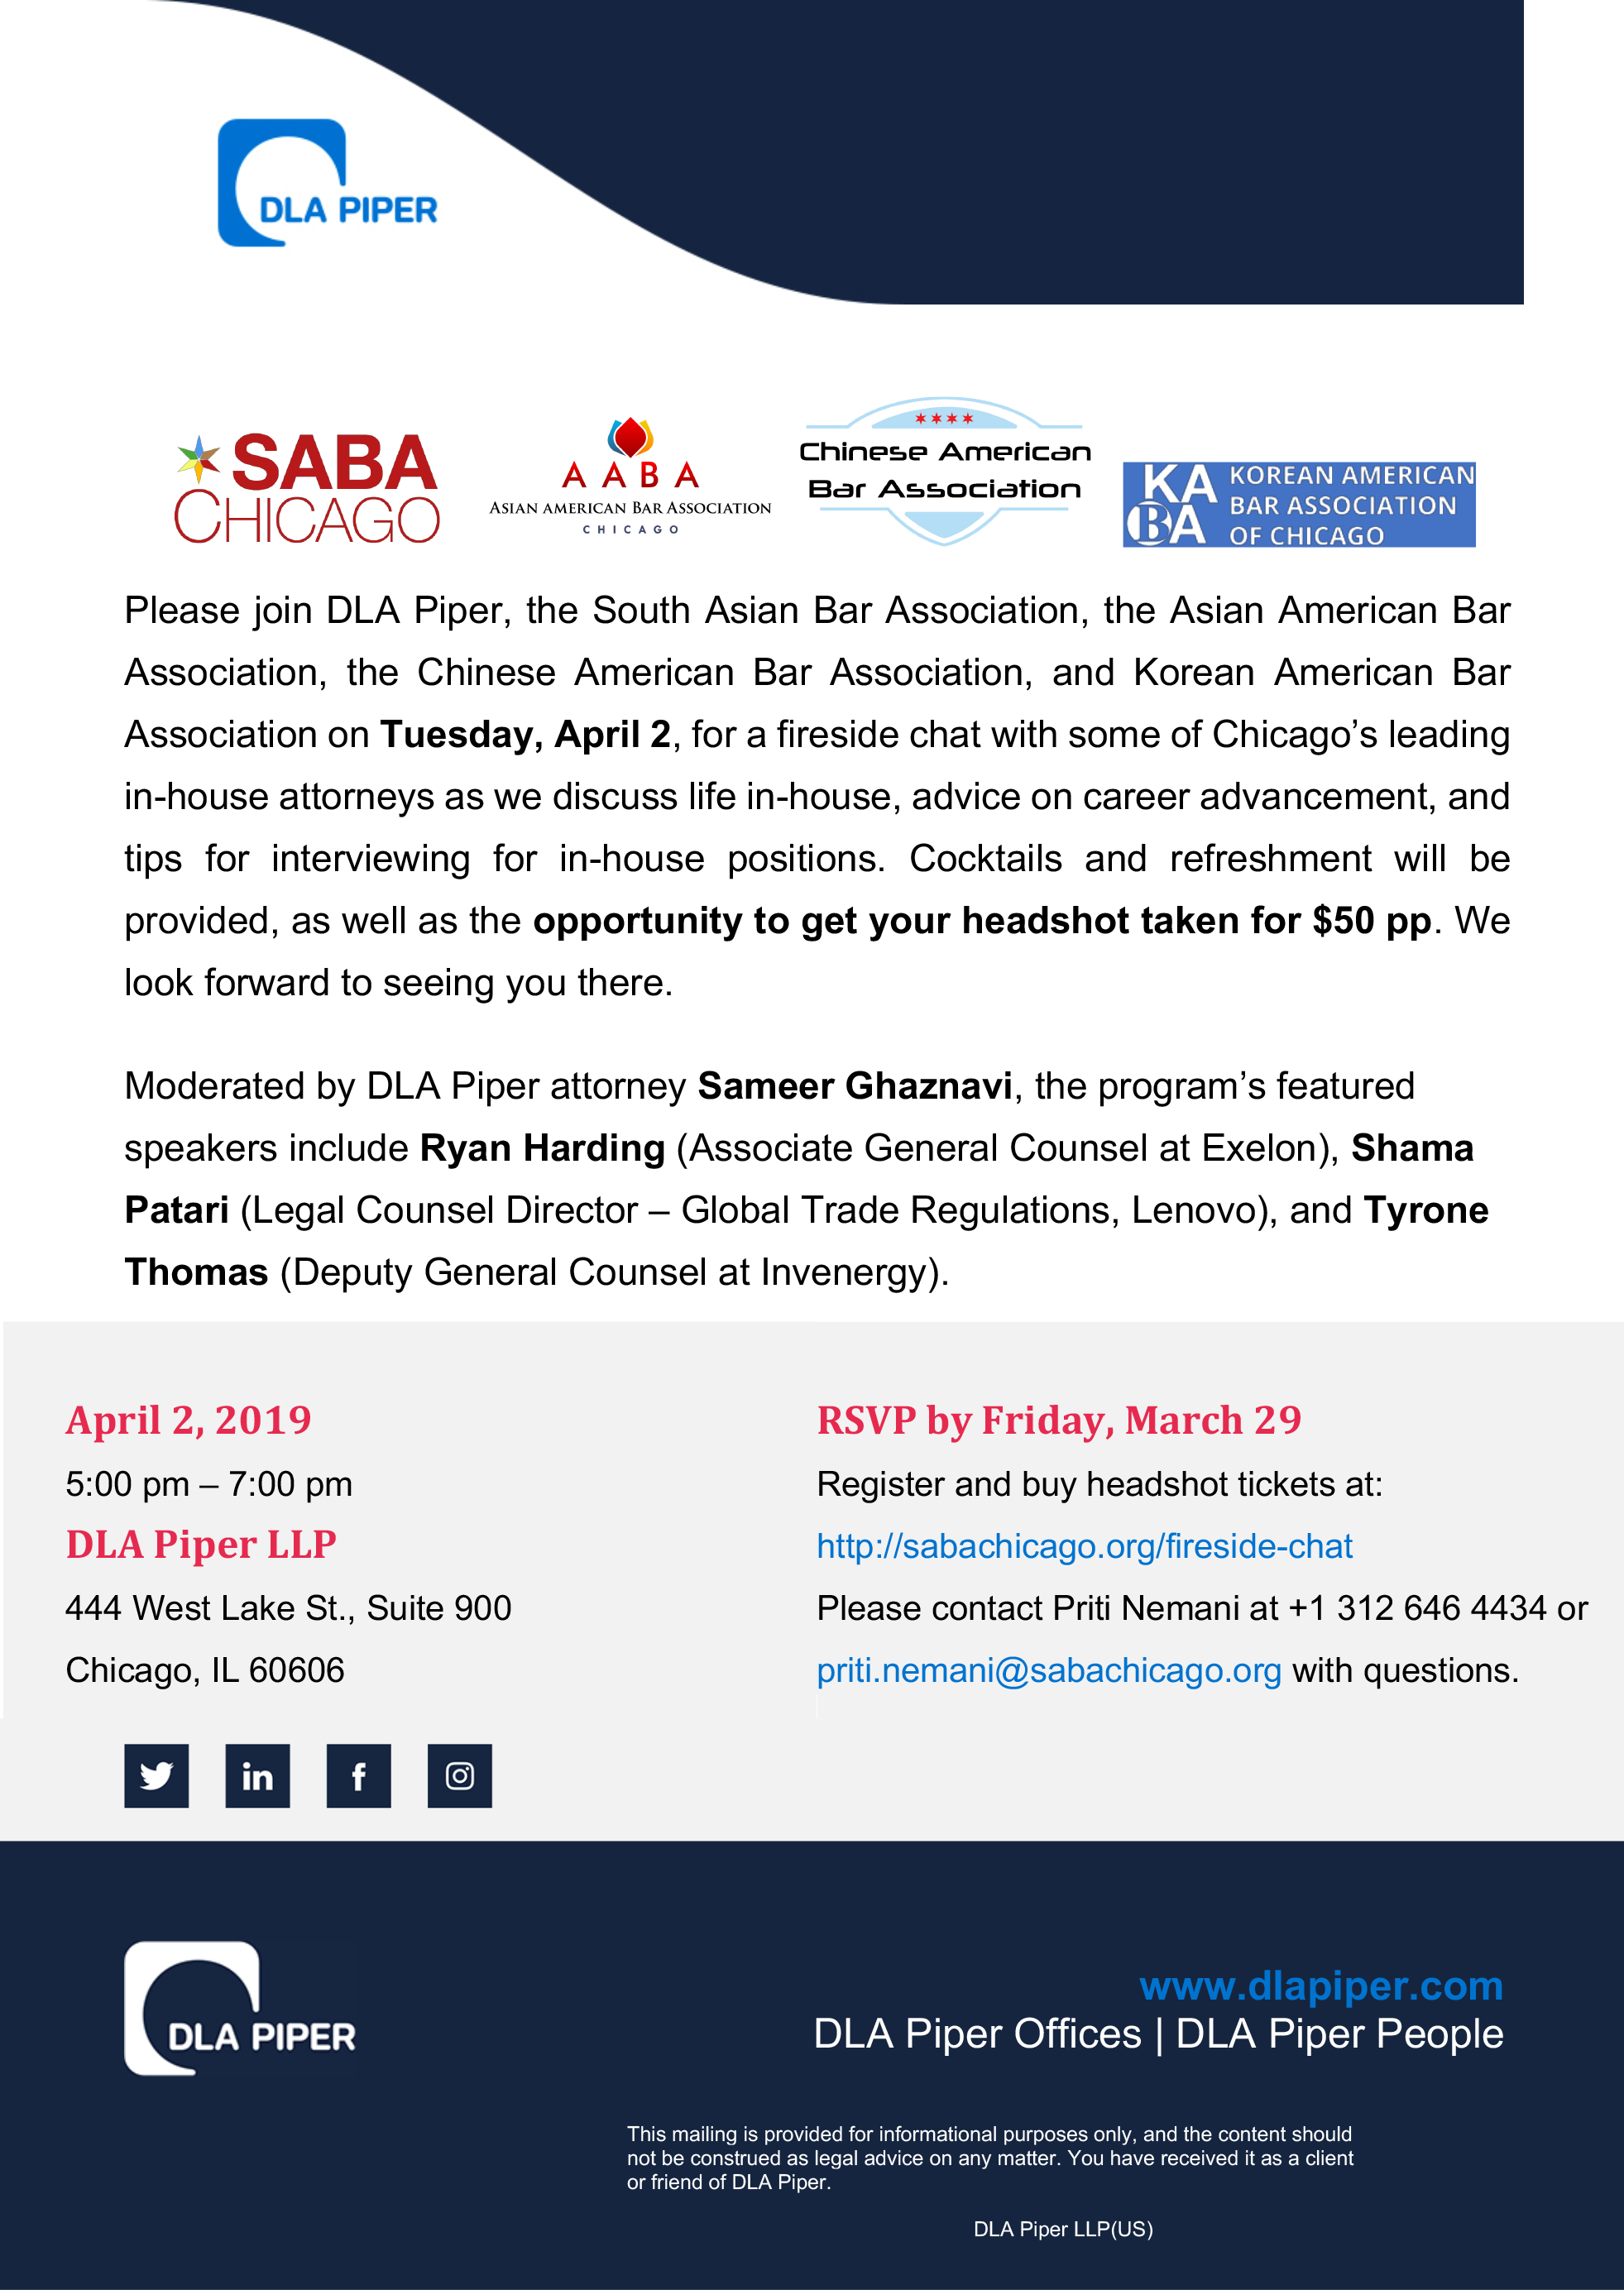 SABA Chicago and DLA Piper Present: a Fireside Chat